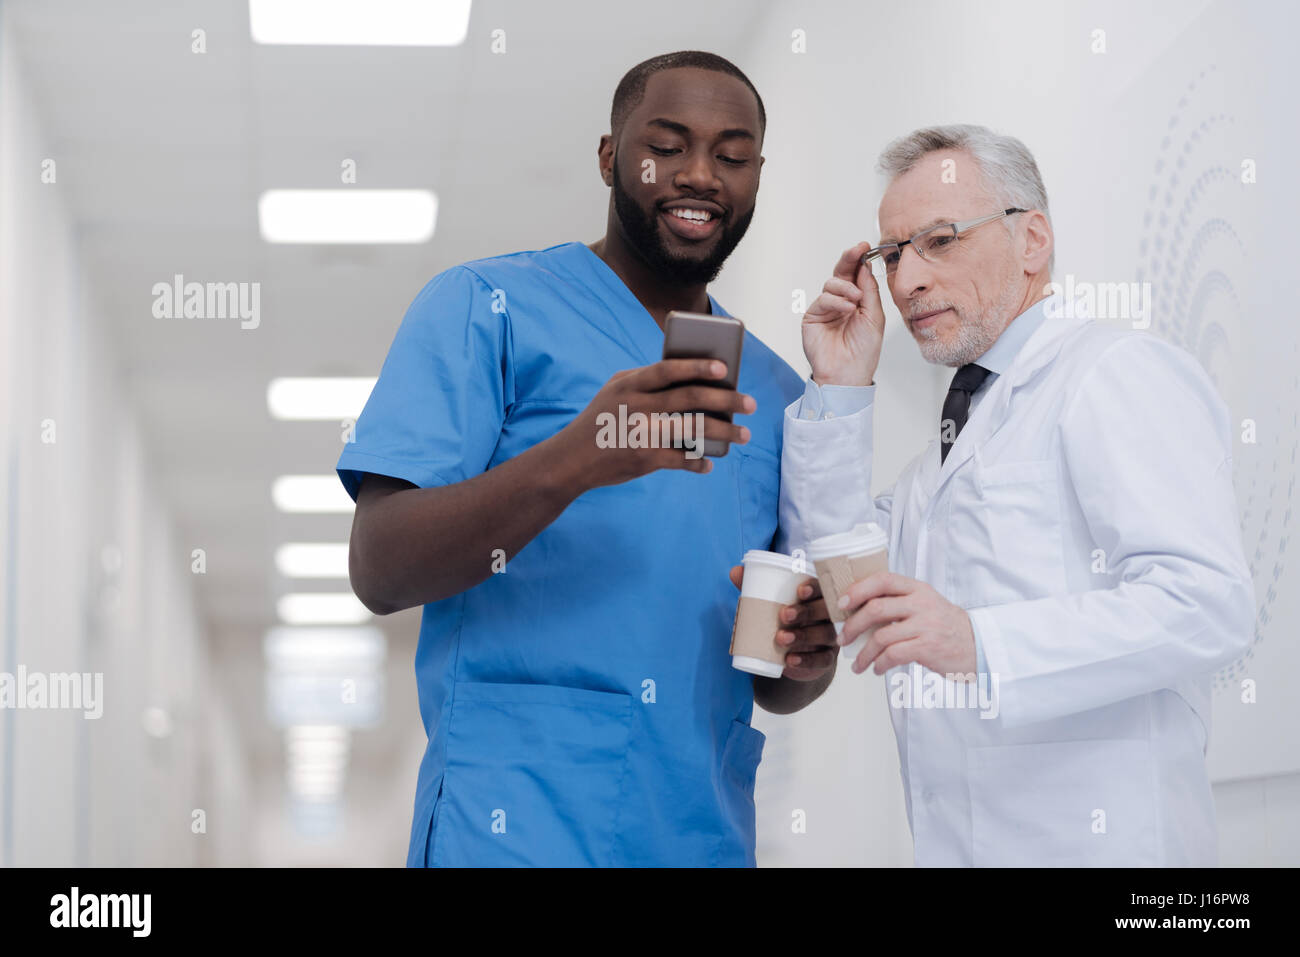 Sociable African American intern sharing news with senior colleague Stock Photo